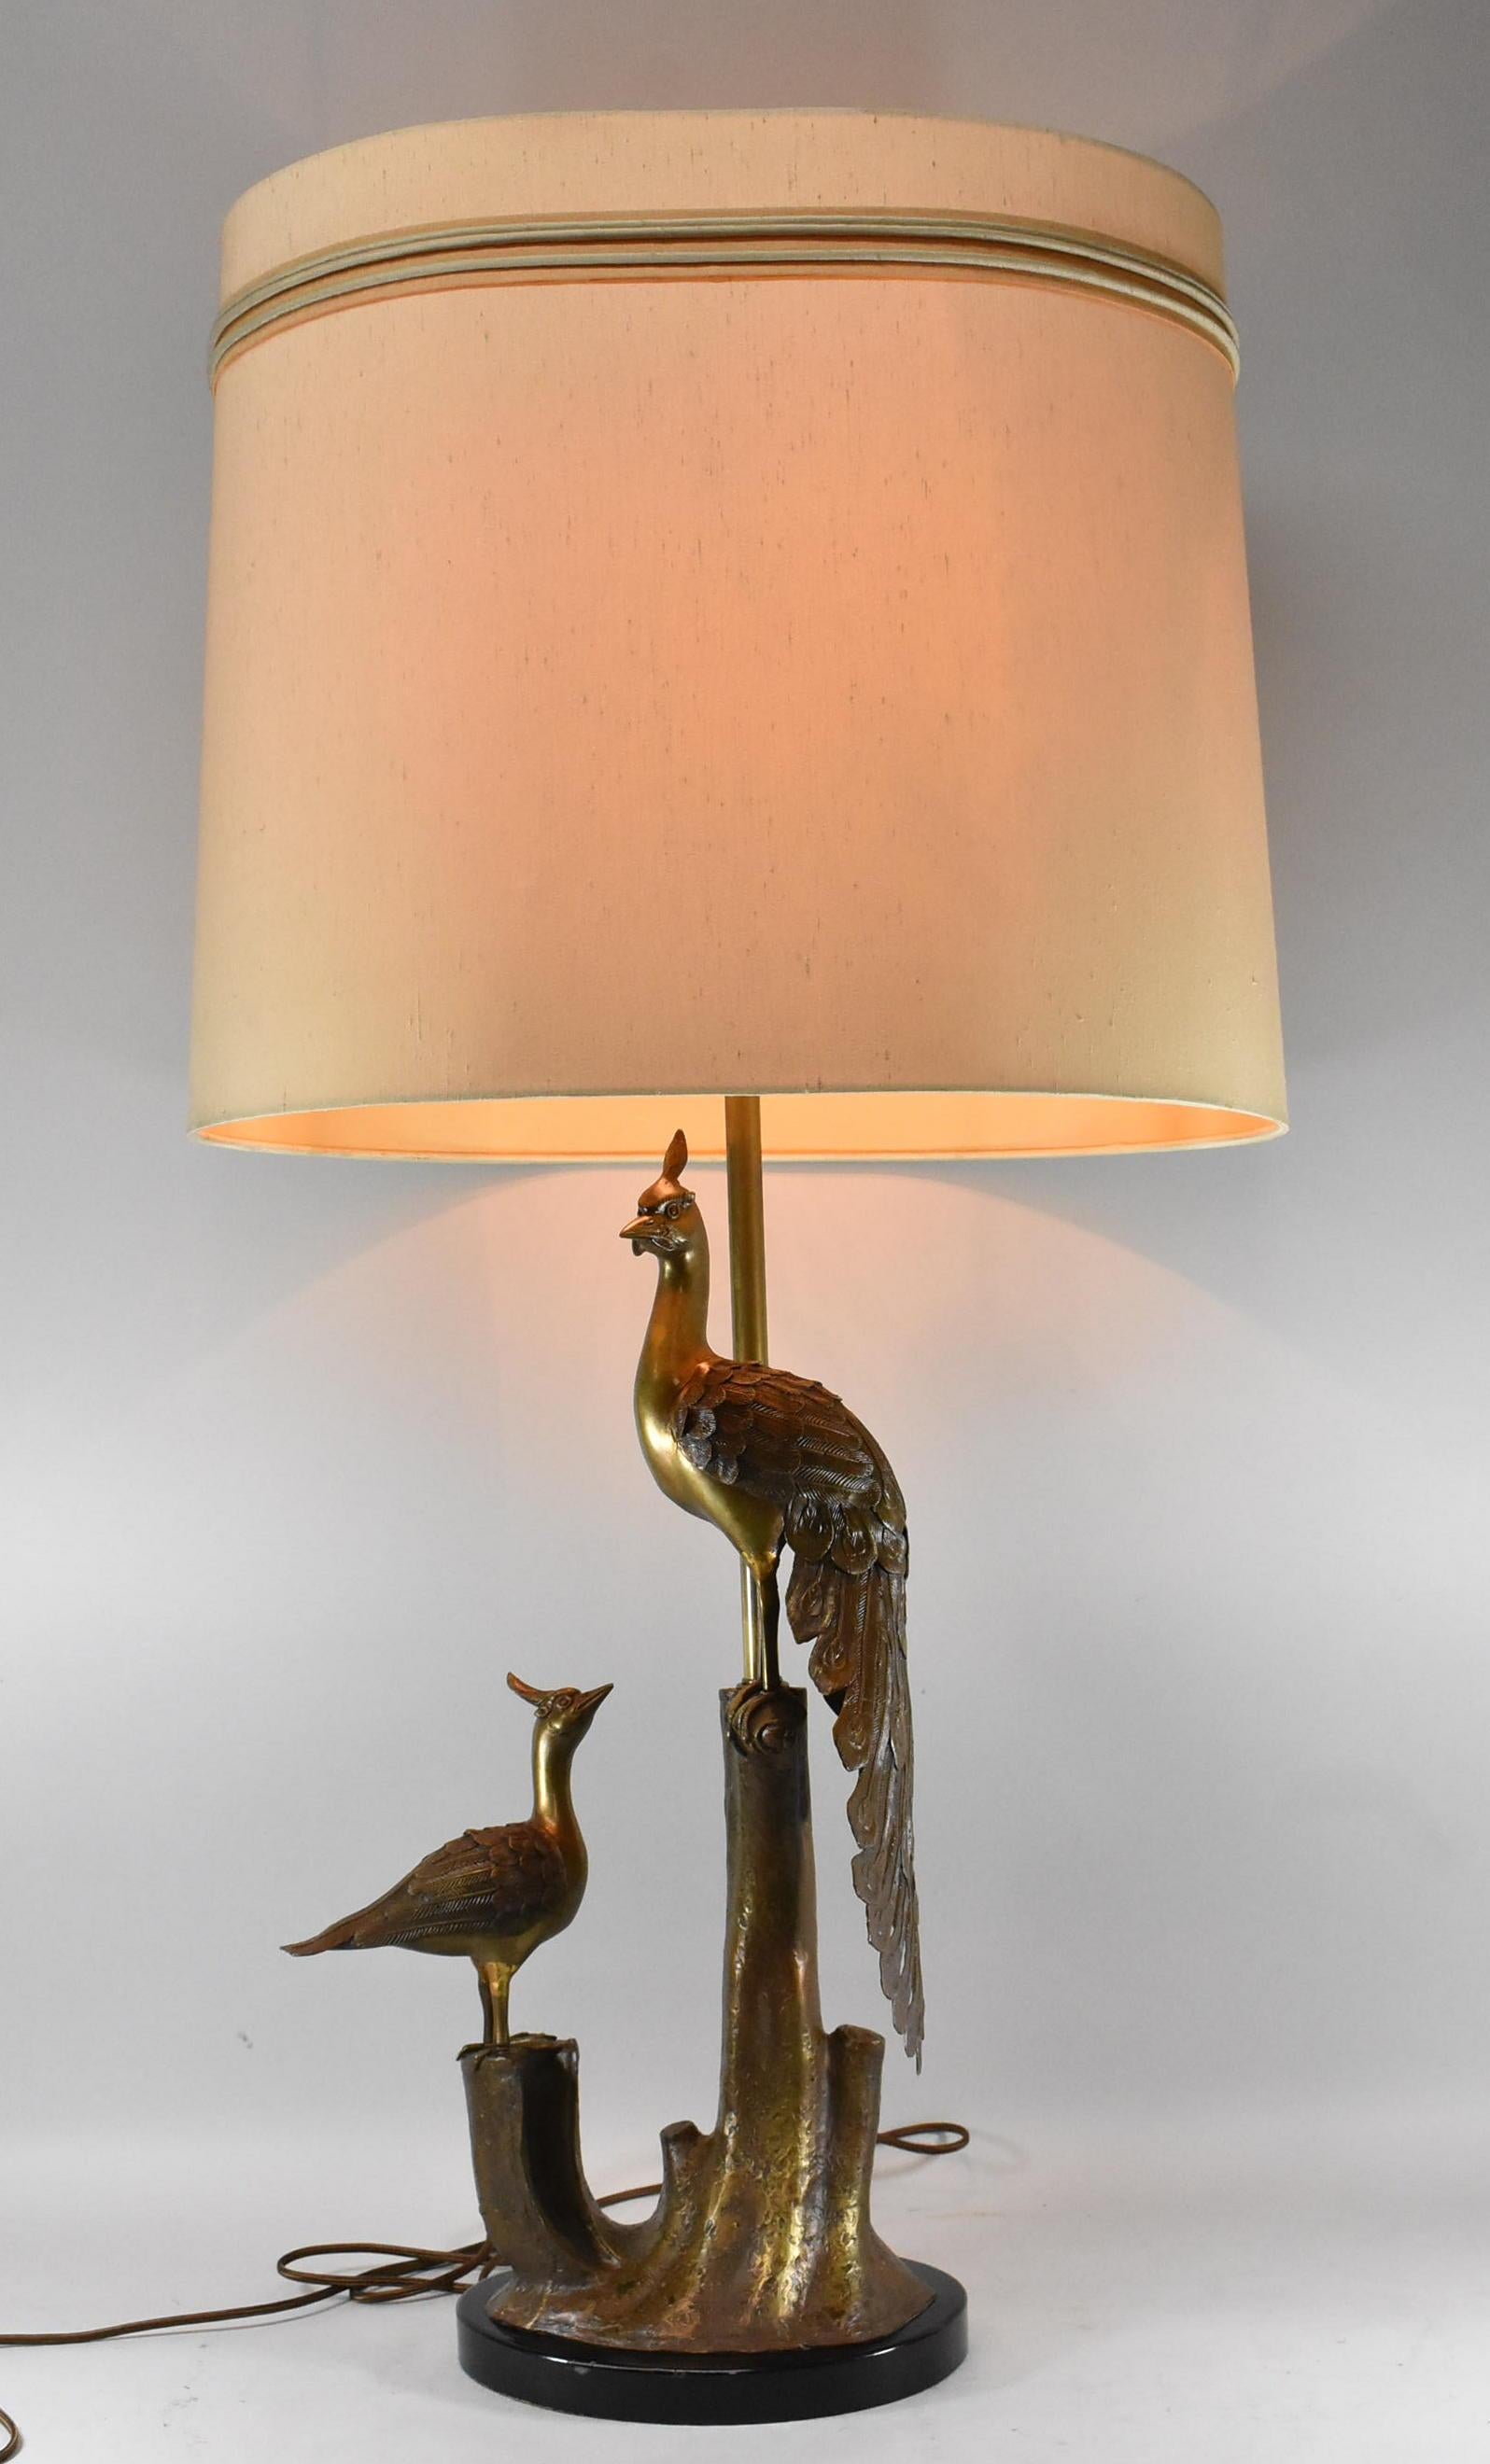 Bronze table lamp with two peacocks sitting on a tree stump. Beautifully textured details in feathers and tree bark. Lamp is rewired. Shade is not included.